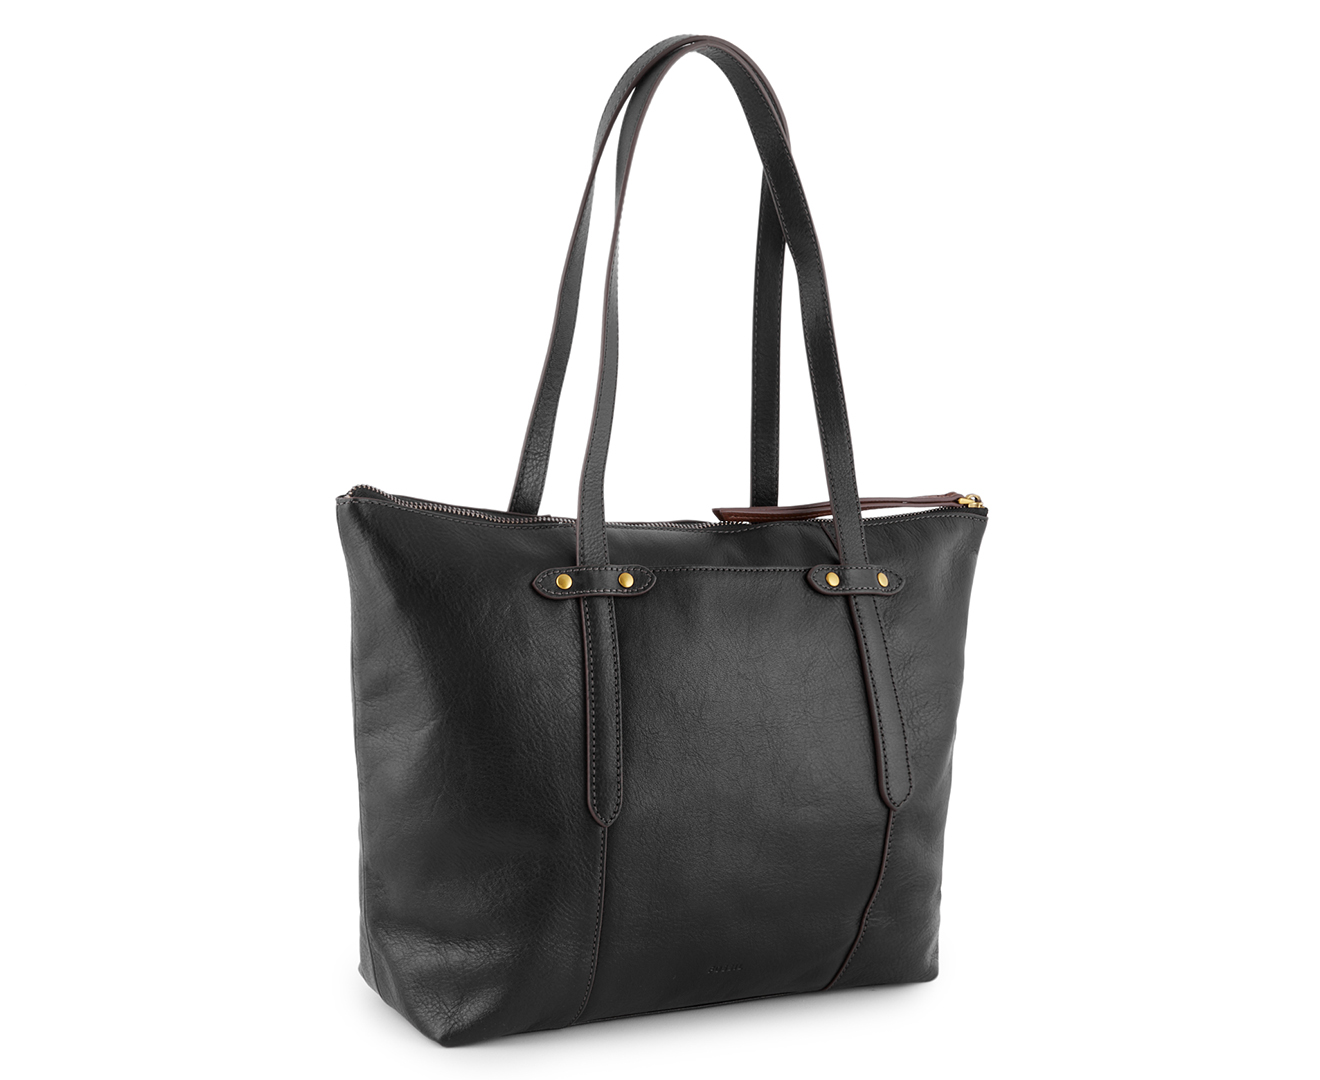 Fossil Felicity Tote Bag - Black | Catch.co.nz